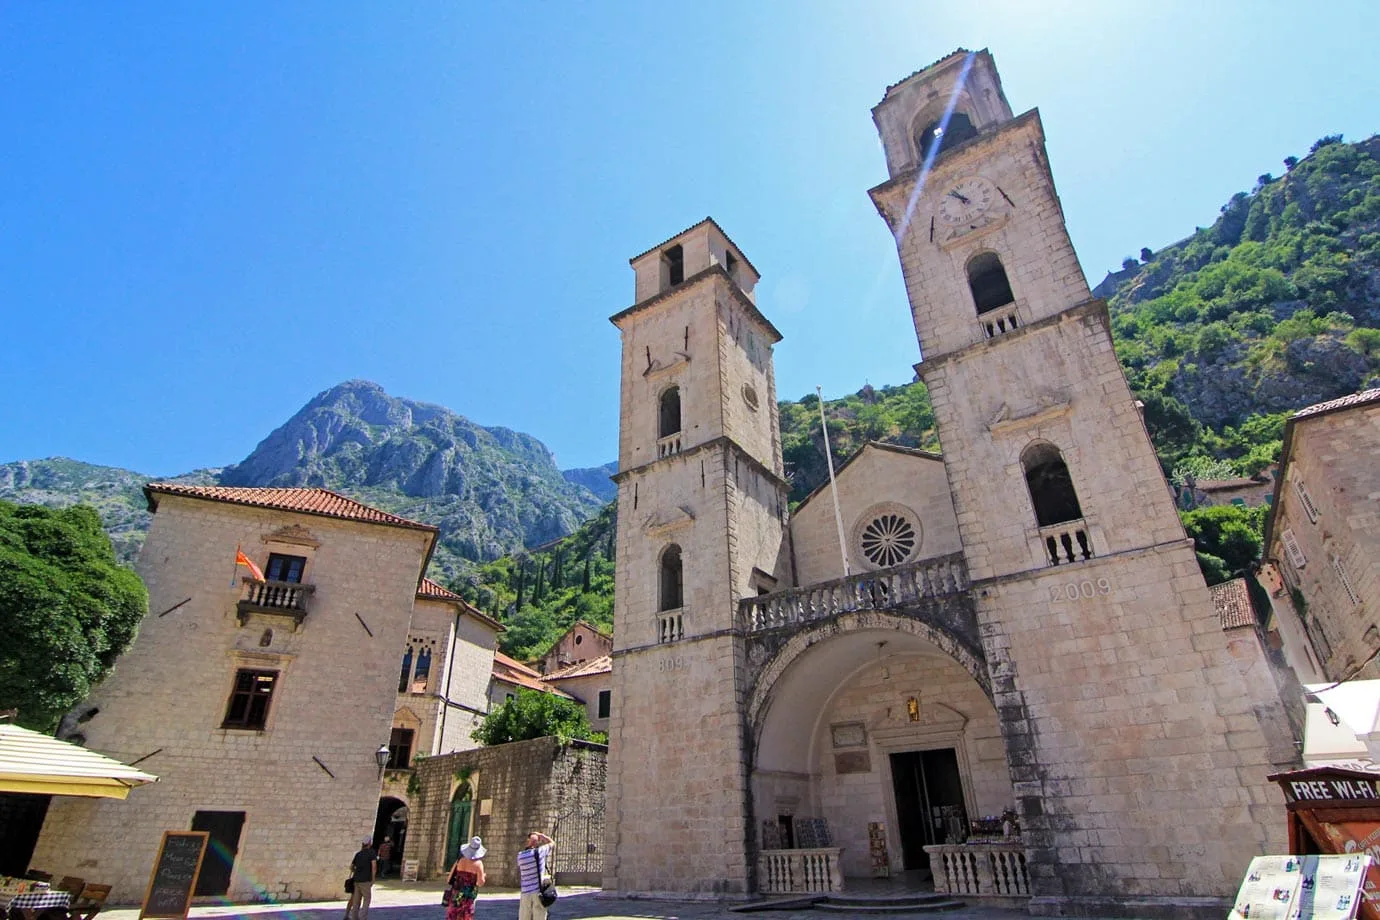 As you lose yourself in Kotor, the mountains are an ever present reminder of where you are